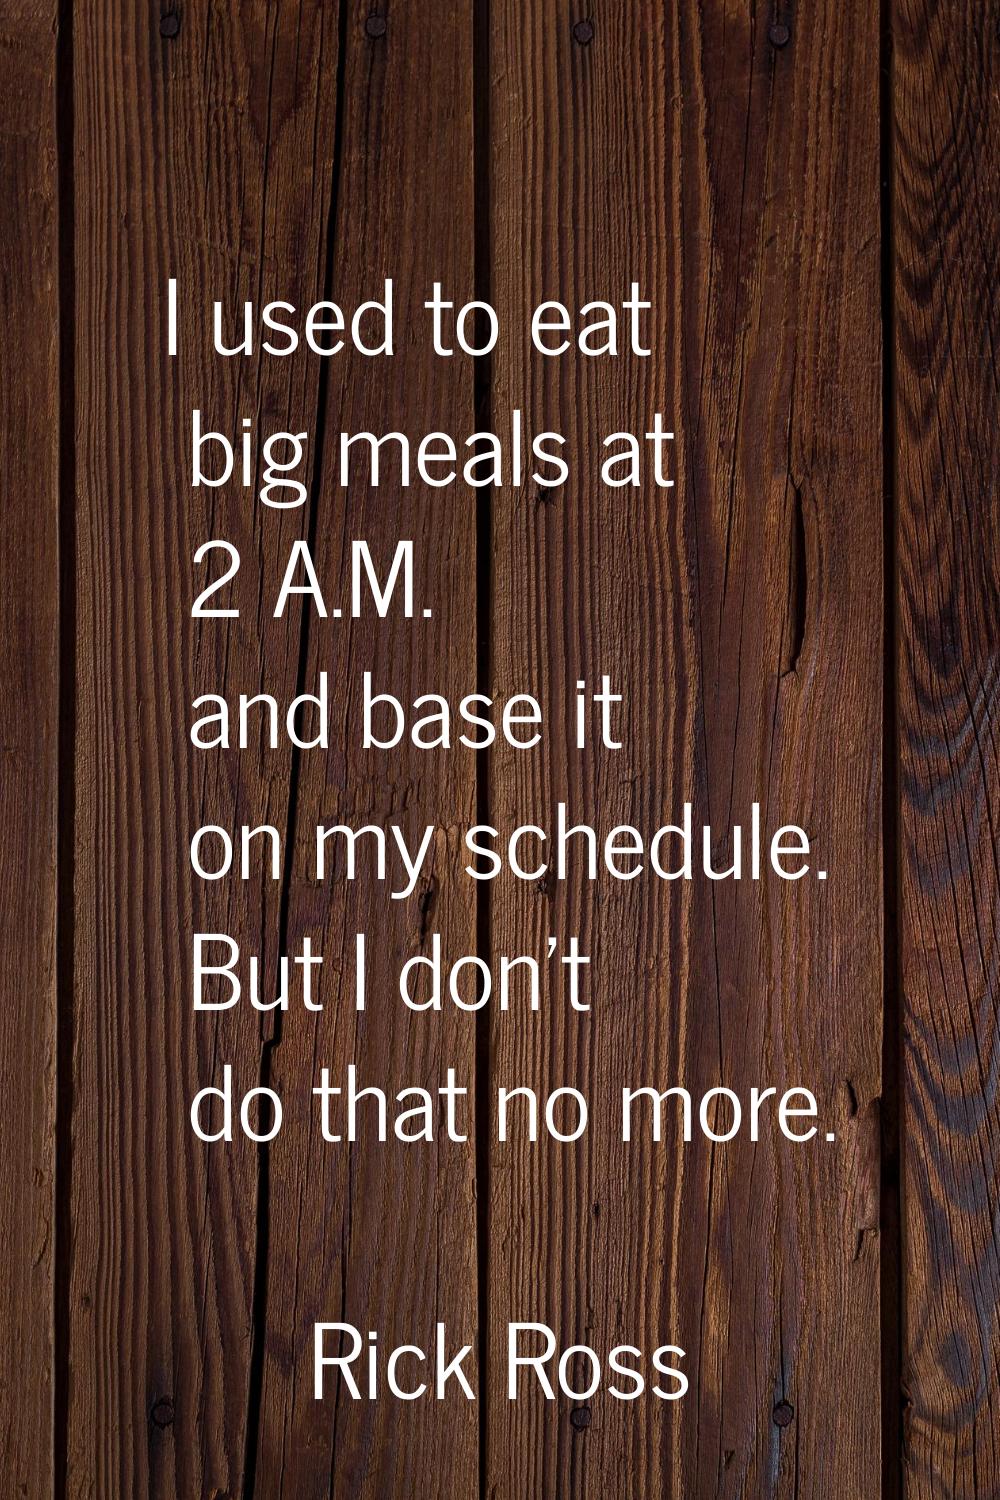 I used to eat big meals at 2 A.M. and base it on my schedule. But I don't do that no more.